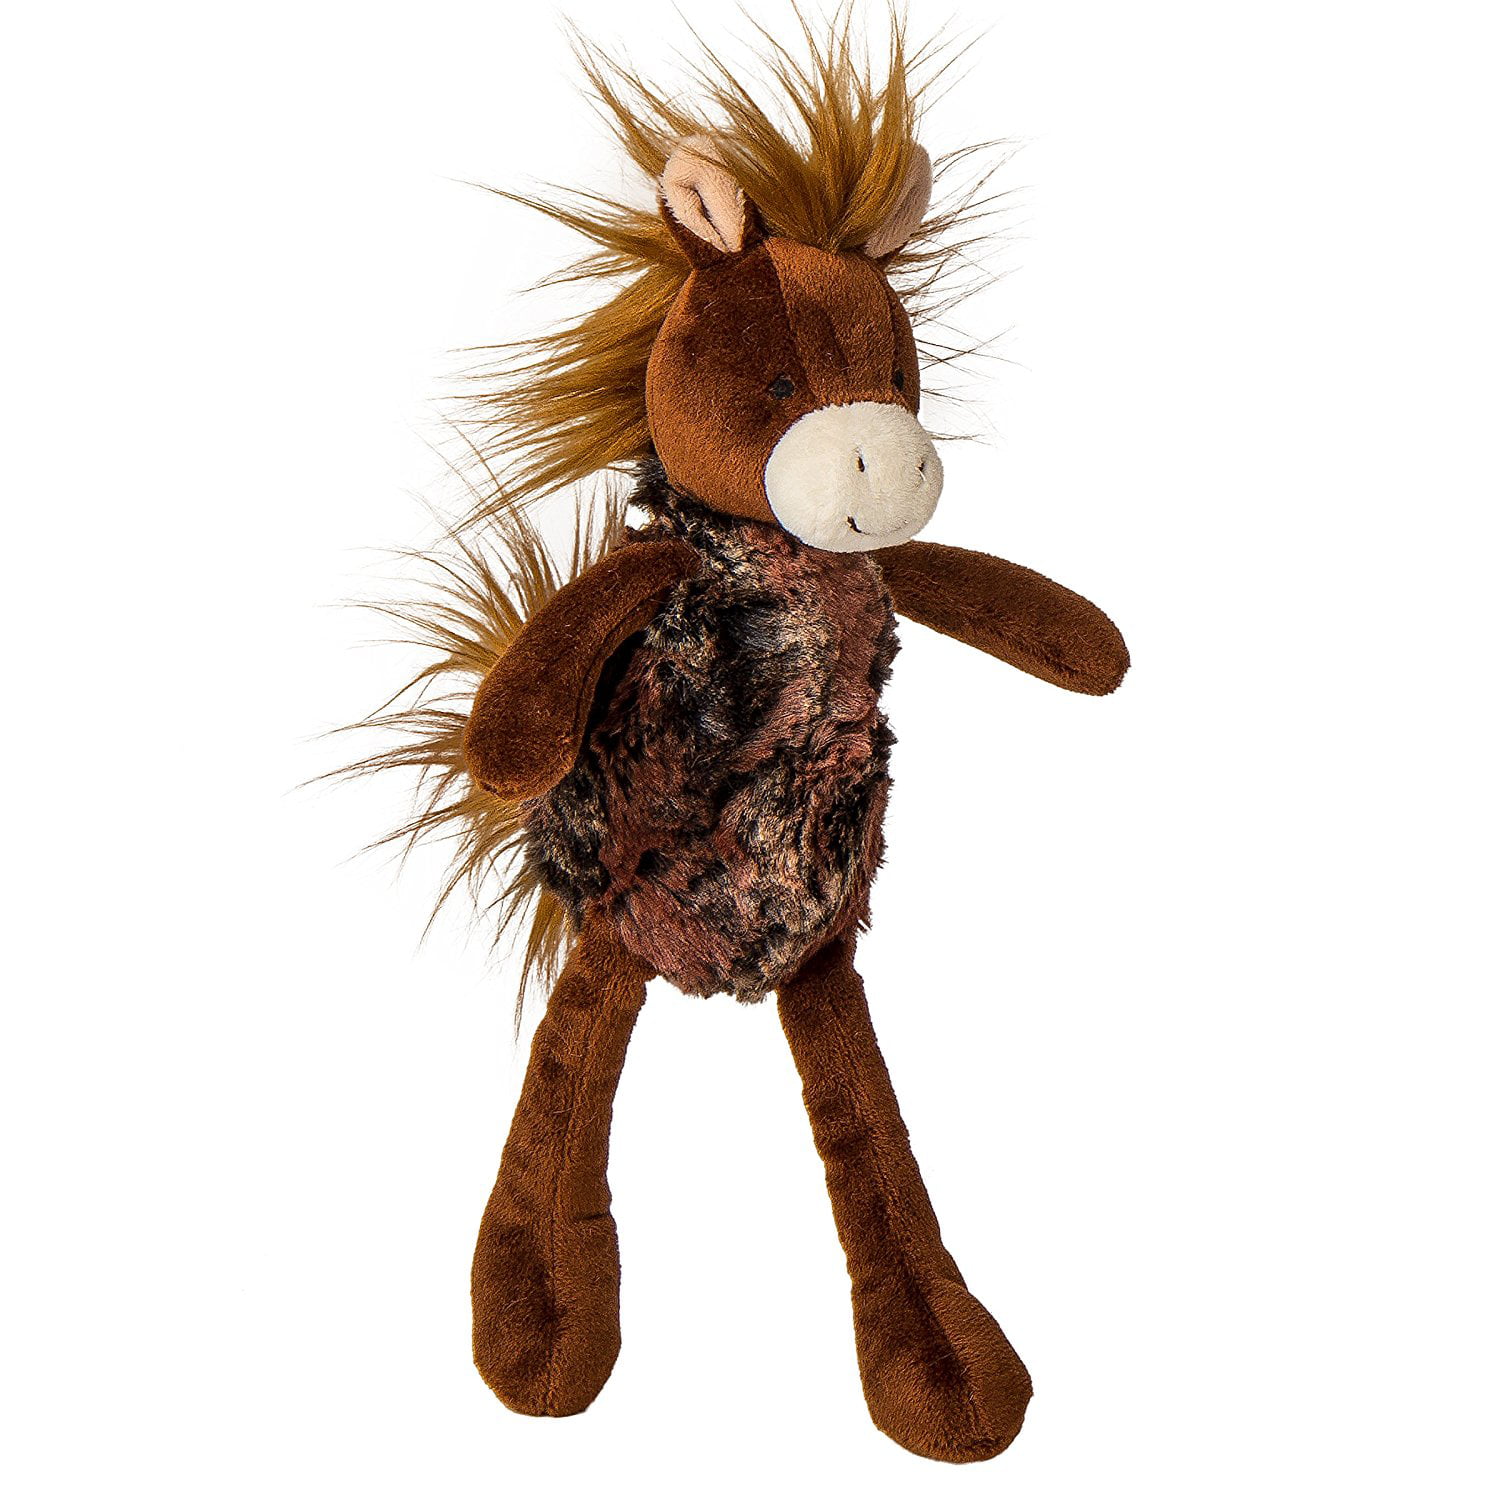 MARY MEYER Talls 'N Smalls Plush Stuffed Animal Smalls Horse  9" NEW WITH TAGS 